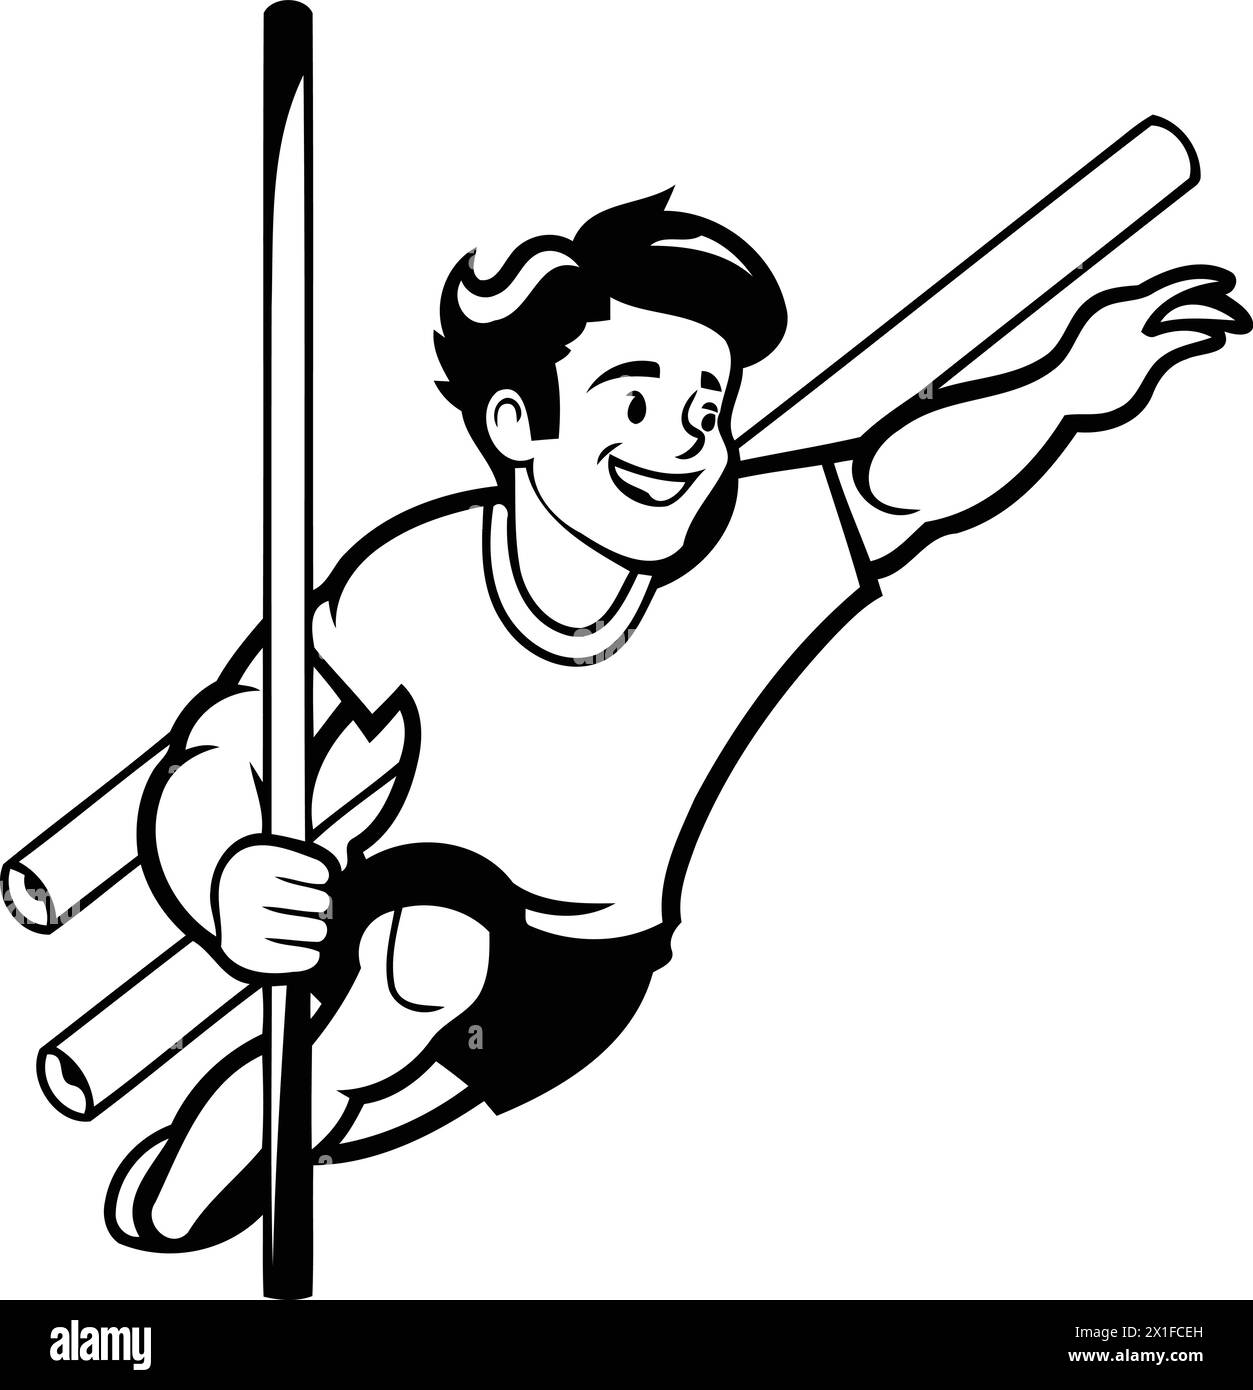 Illustration of a man pole vaulting viewed from the side set inside circle on isolated white background done in cartoon style. Stock Vector